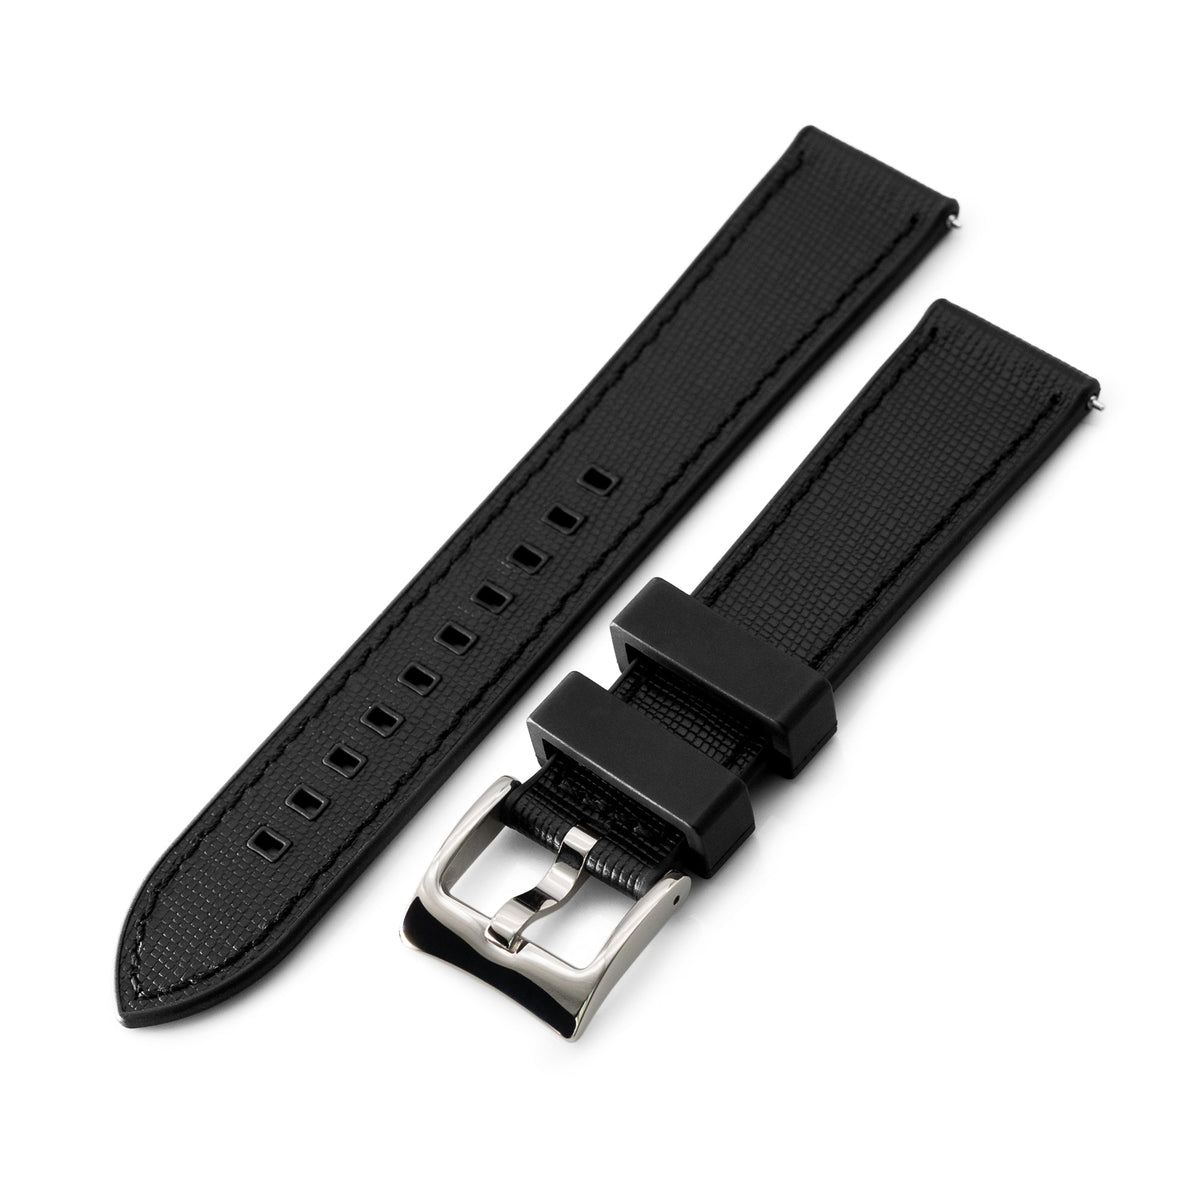 20mm Black Quick Release Leather-FKM Rubber Sports Watch Strap Strapcode Watch Bands